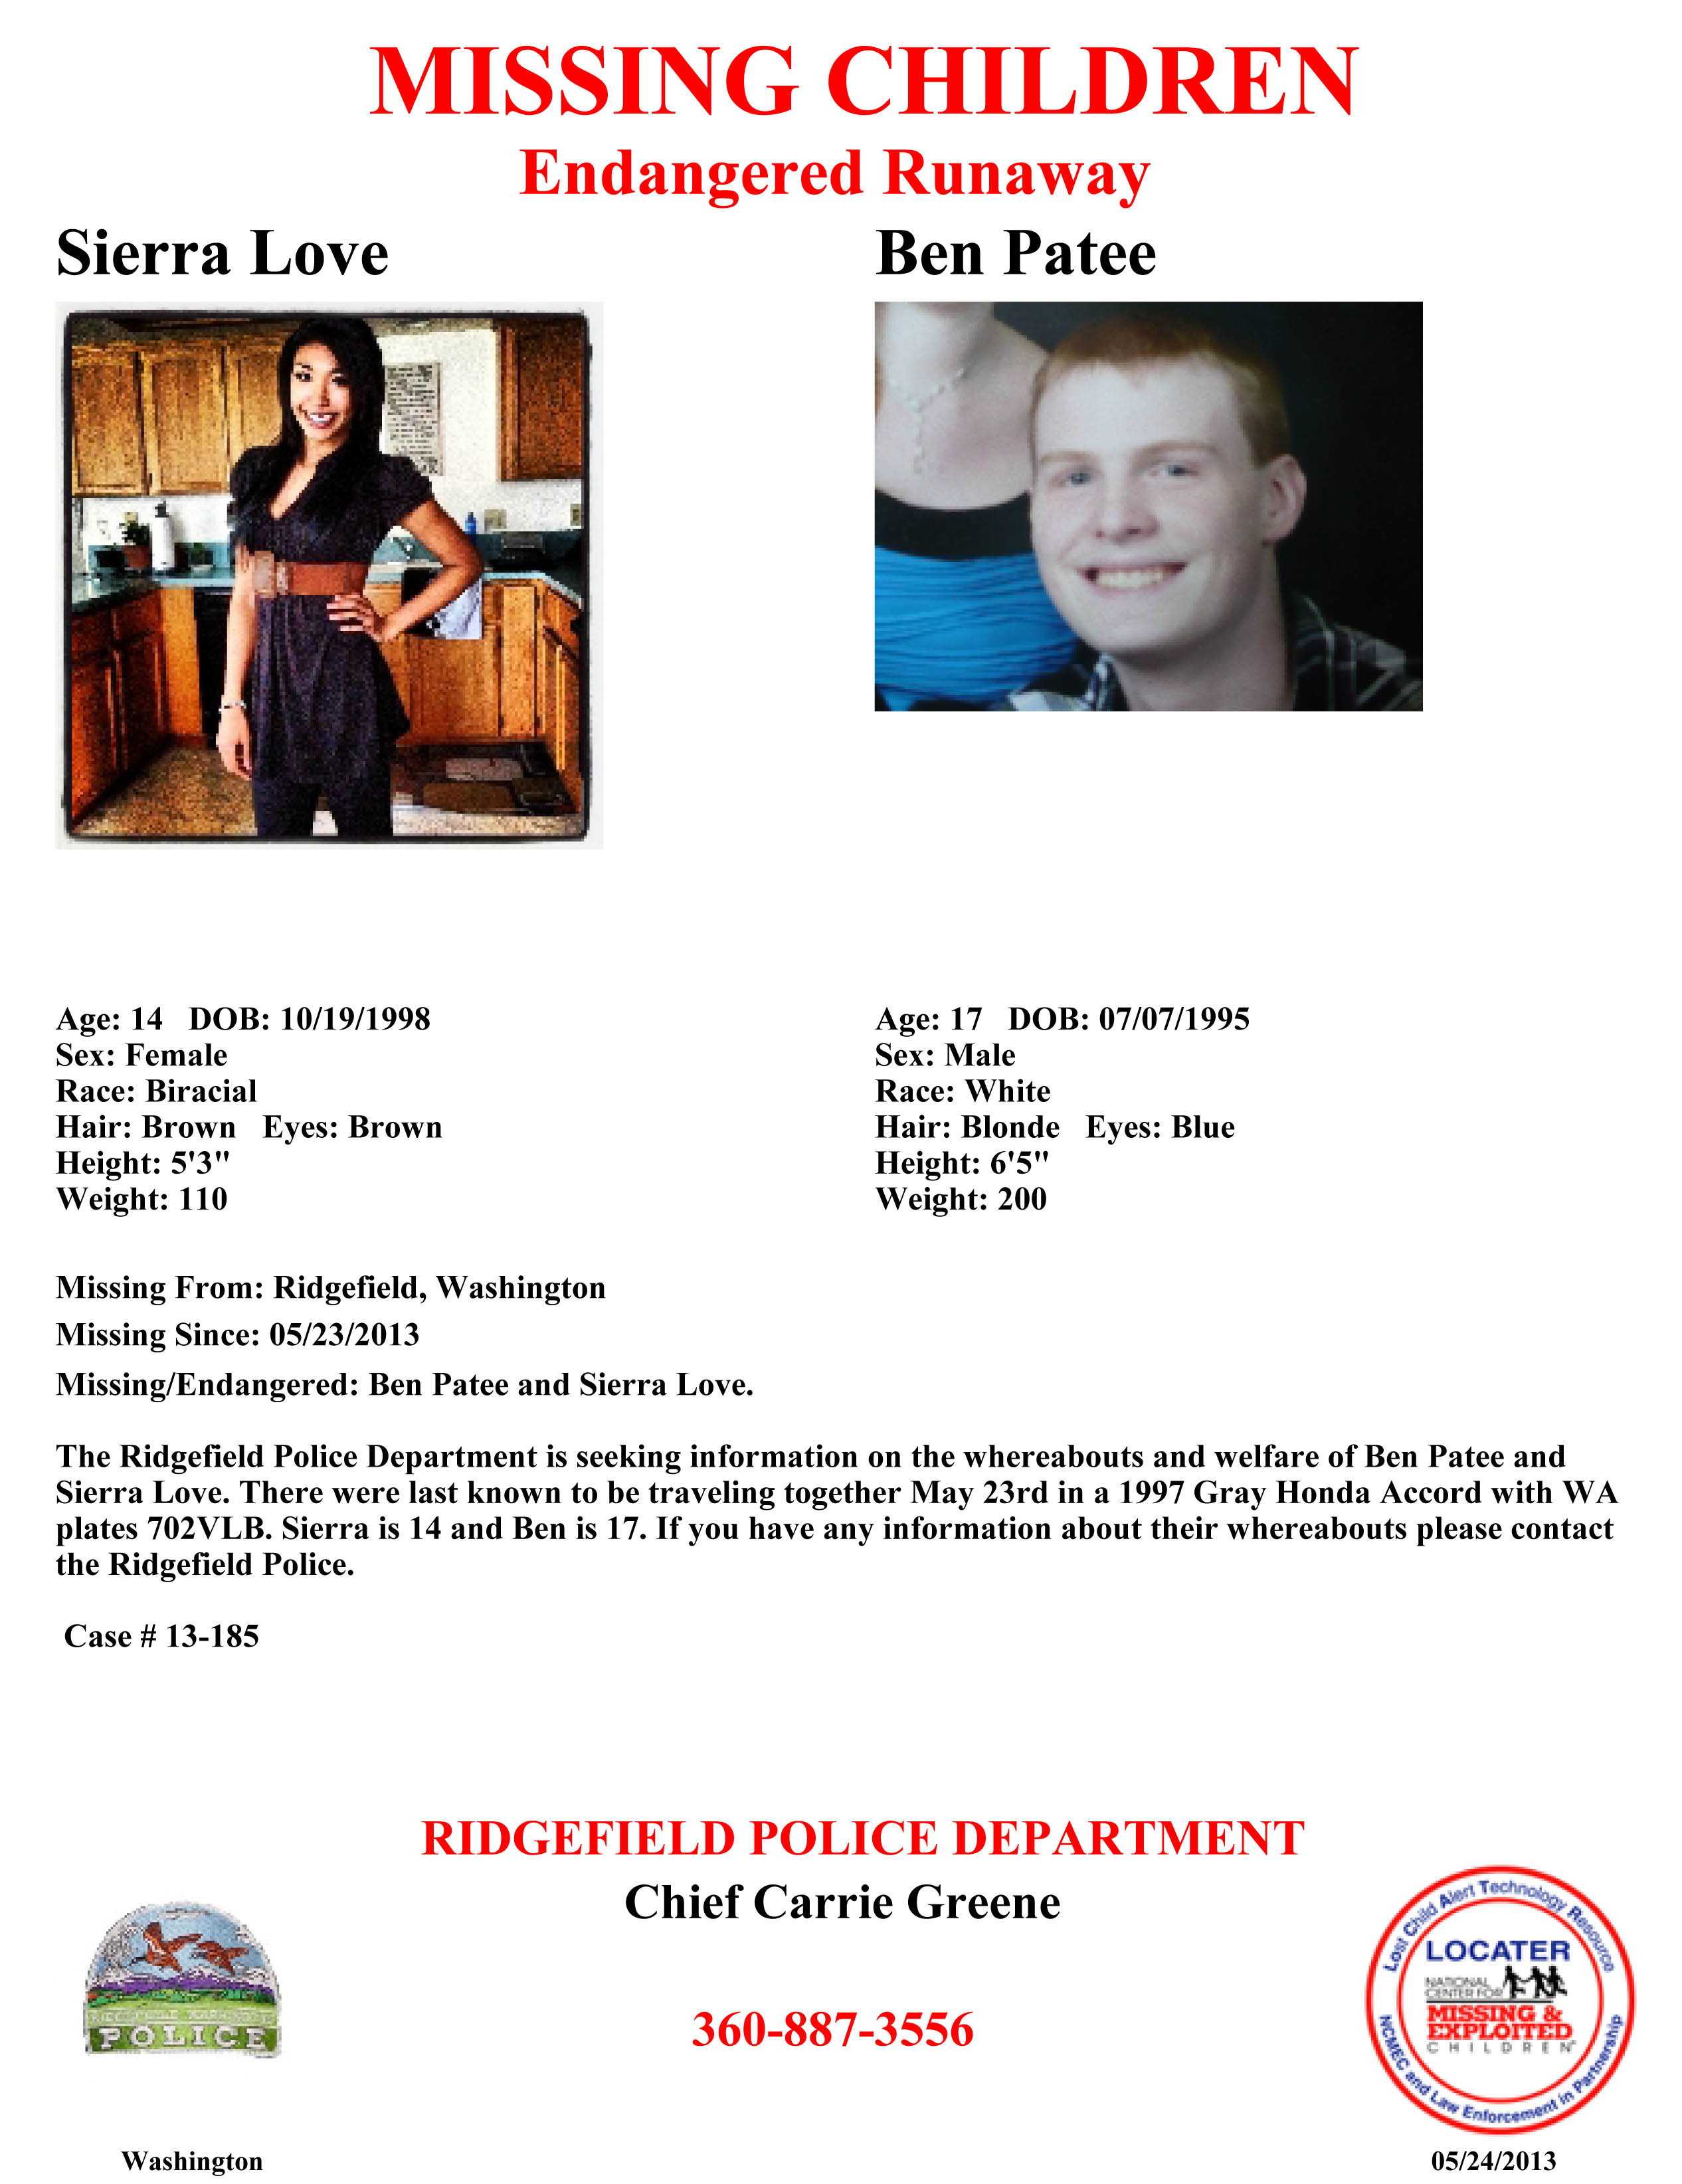 Ben Patee and Sierra Love are missing. Their whereabouts are being sought by the Ridgefield Police Department.